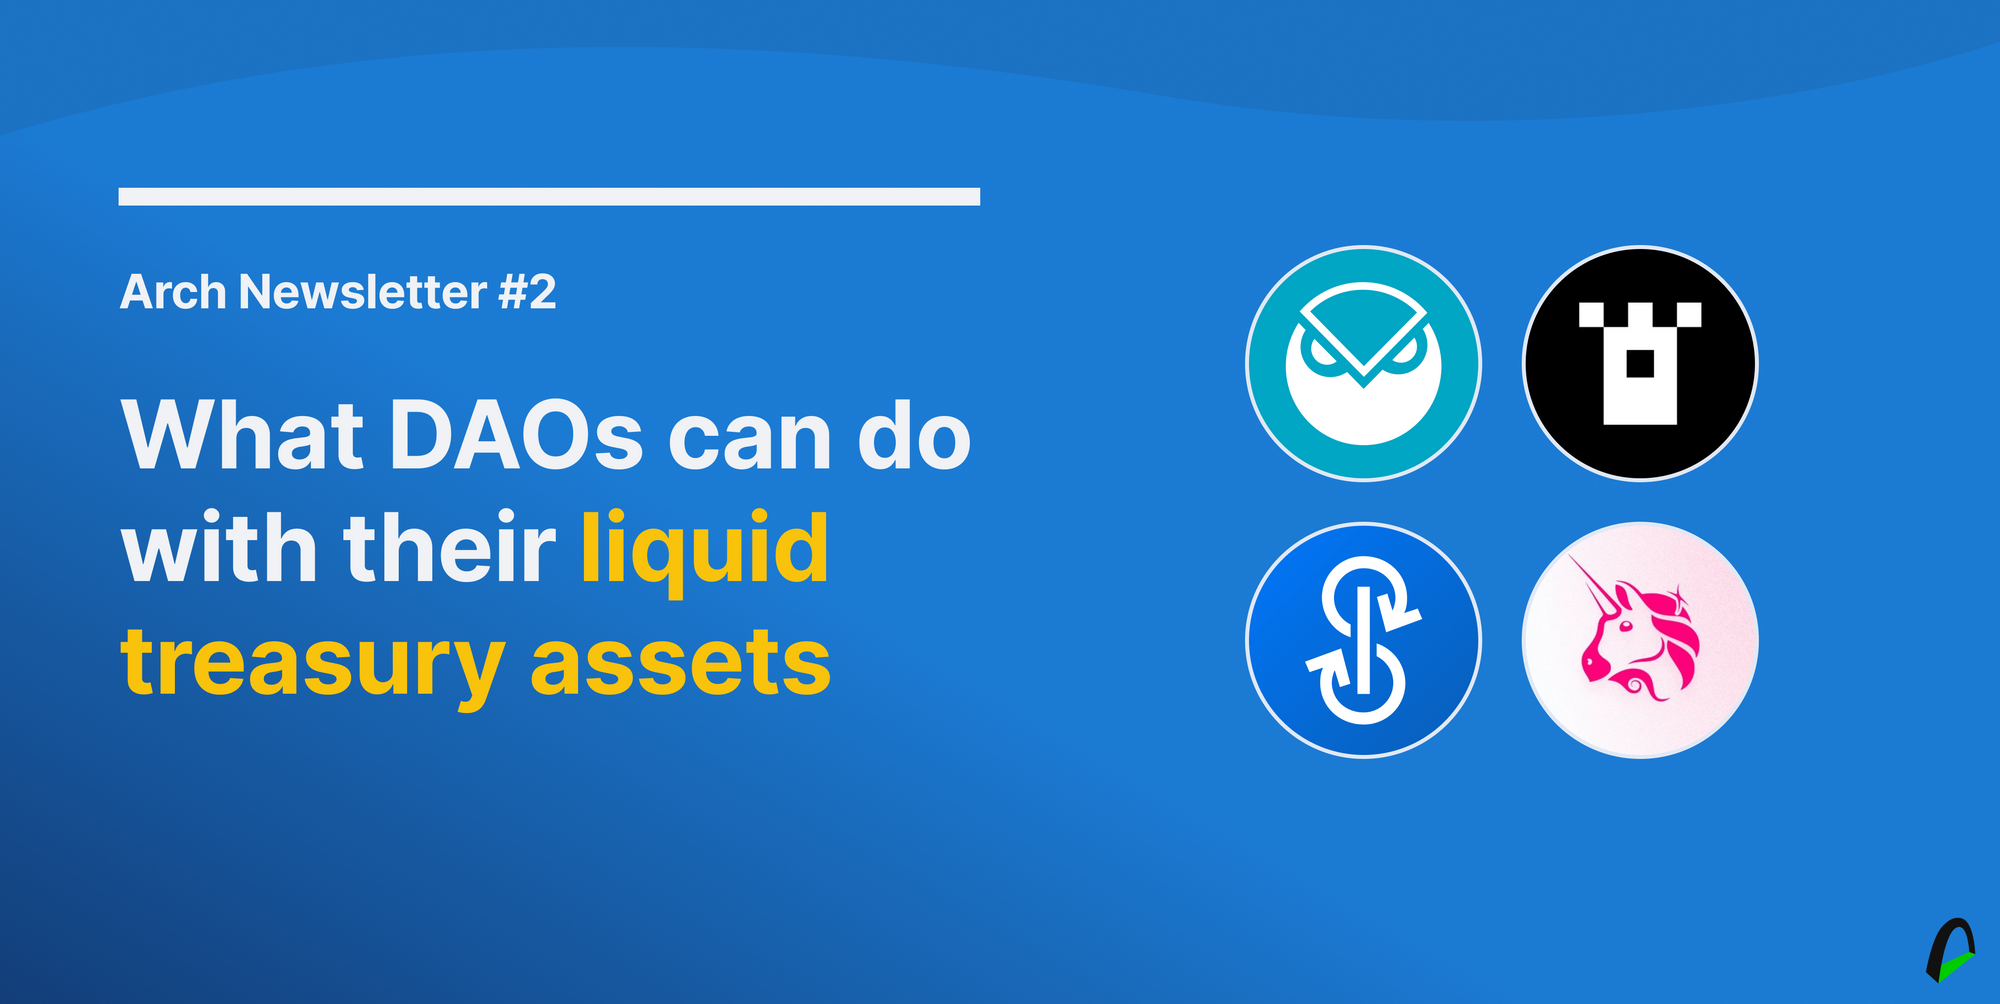 Arch Newsletter #2:  What DAOs can do with their liquid treasury assets